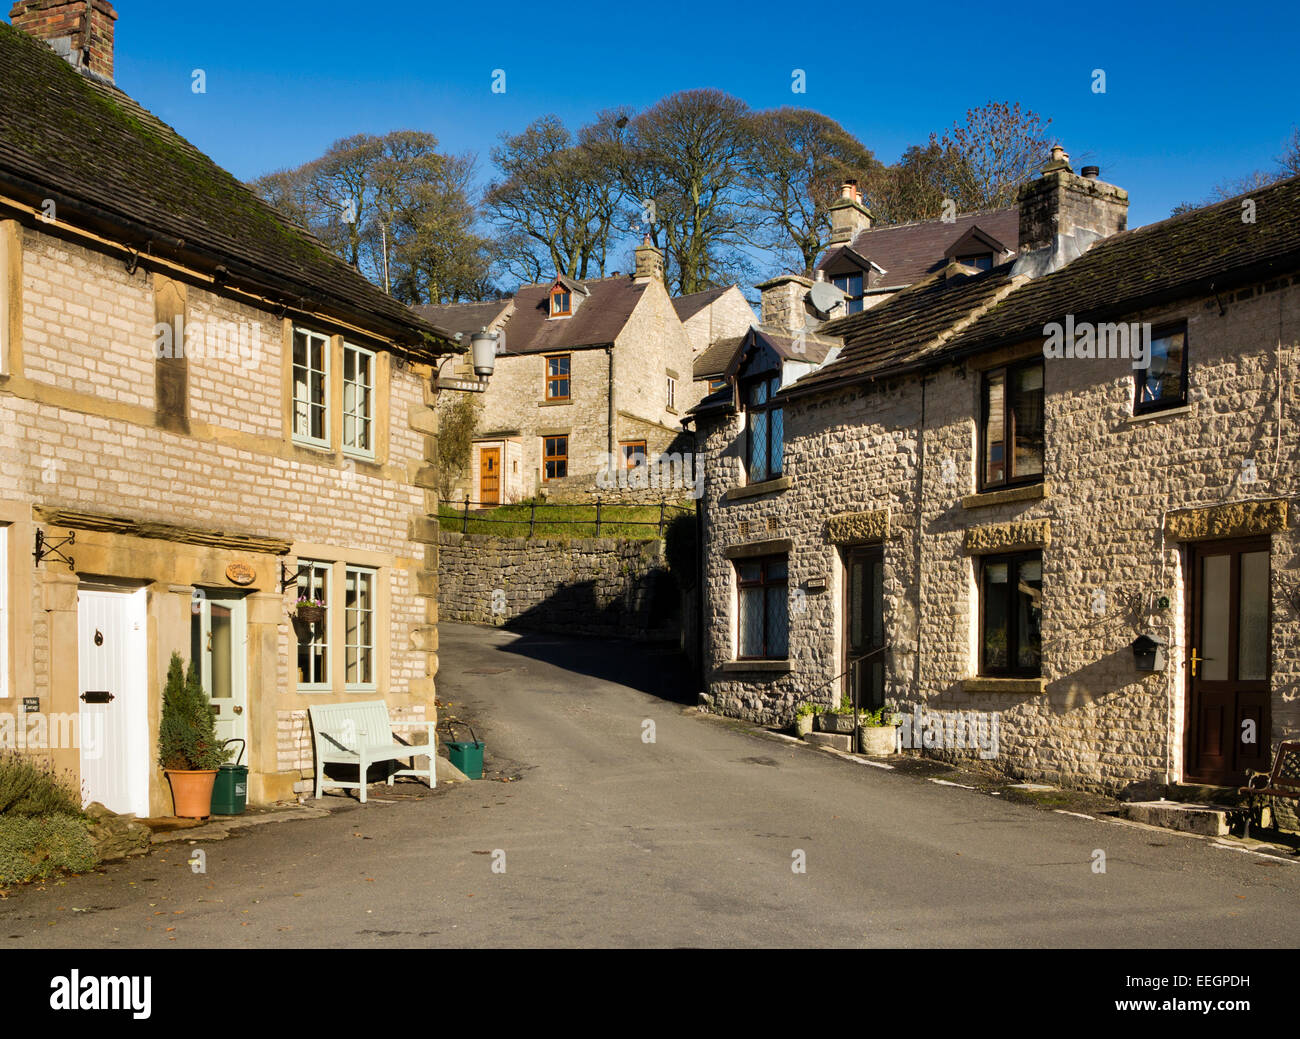 UK, Derbyshire, Tideswell, High Street, cottages at corner of old Cattle Market Stock Photo